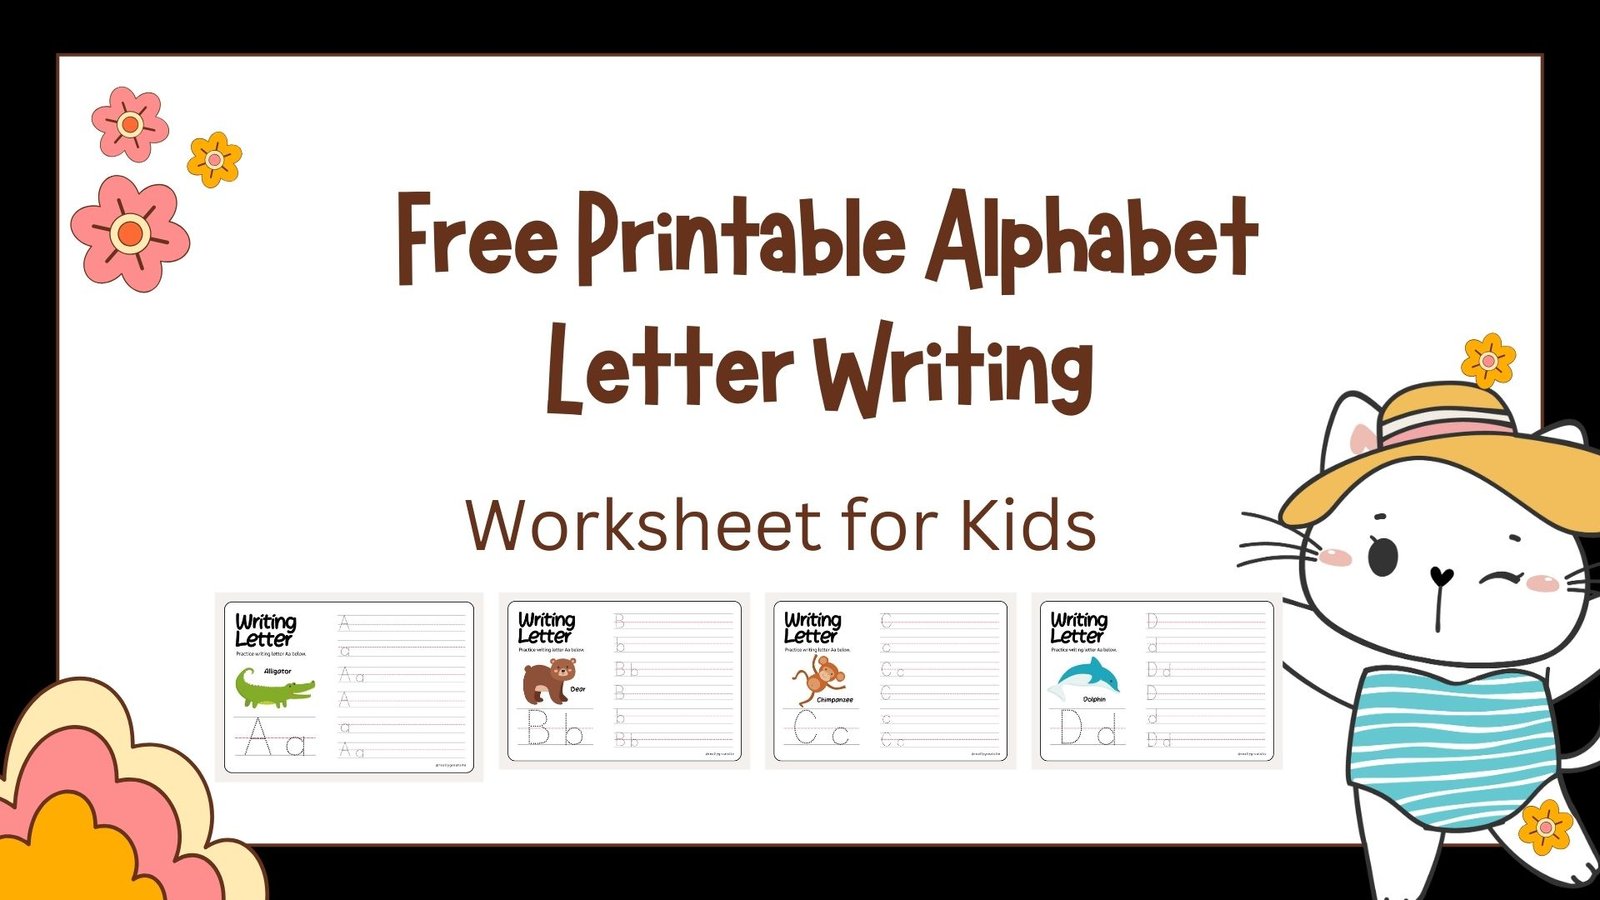 Free Printable Alphabet Letter Writing Worksheets for Kids (26 Pages)